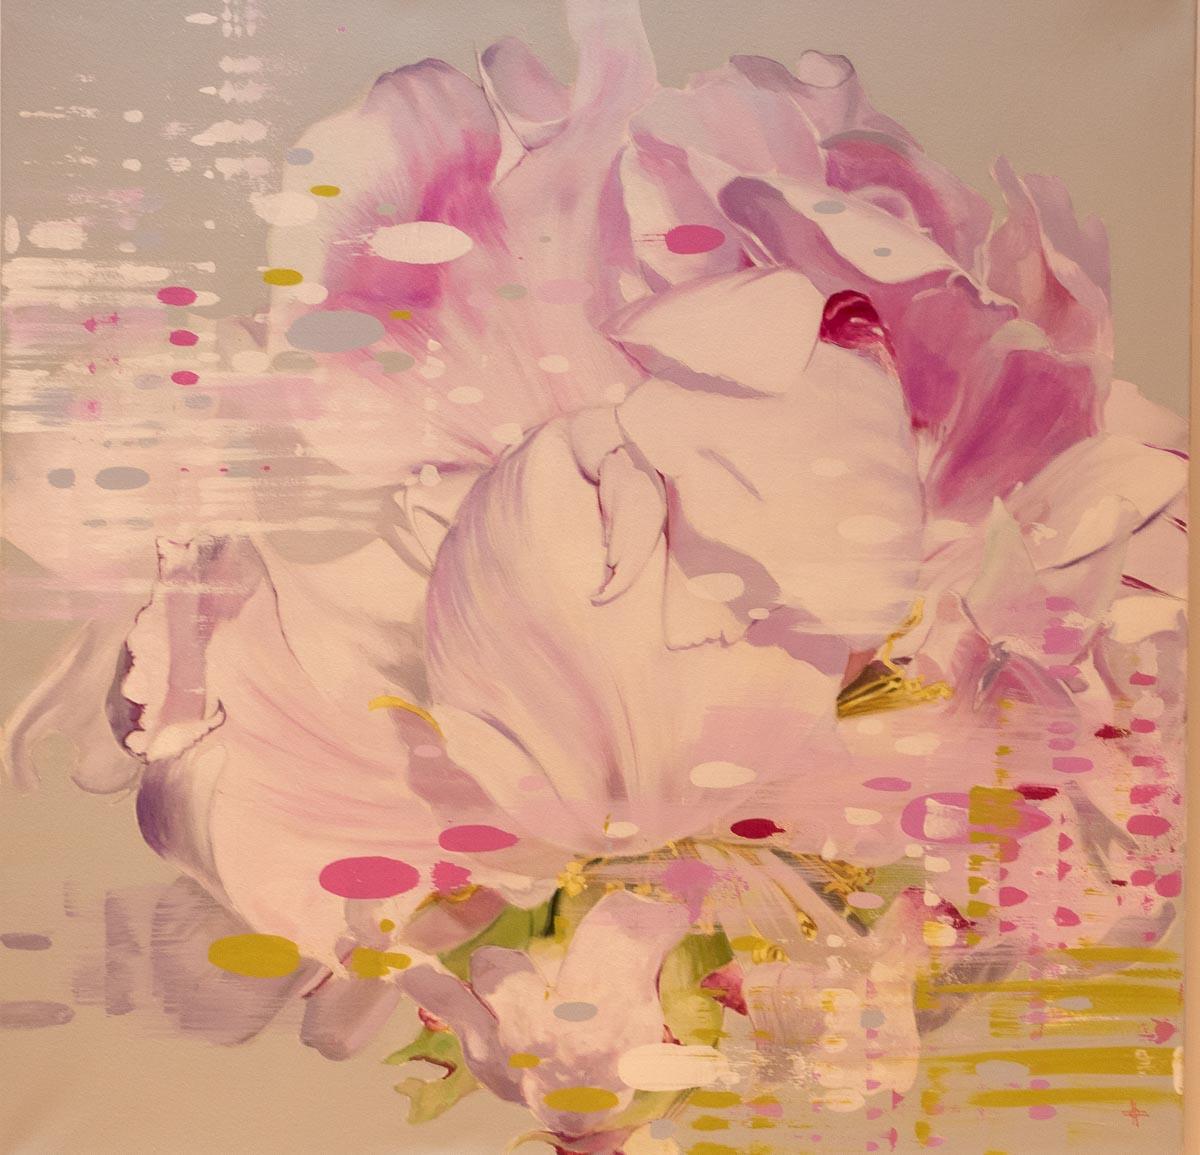 Keng Wai Lee’s gorgeously rich floral impressions are a synergy of decorative tableaux and depiction in paint on canvas of his memories and imagination.

“Using acrylic as a medium, I tend to reminisce through my past getting inspiration to create